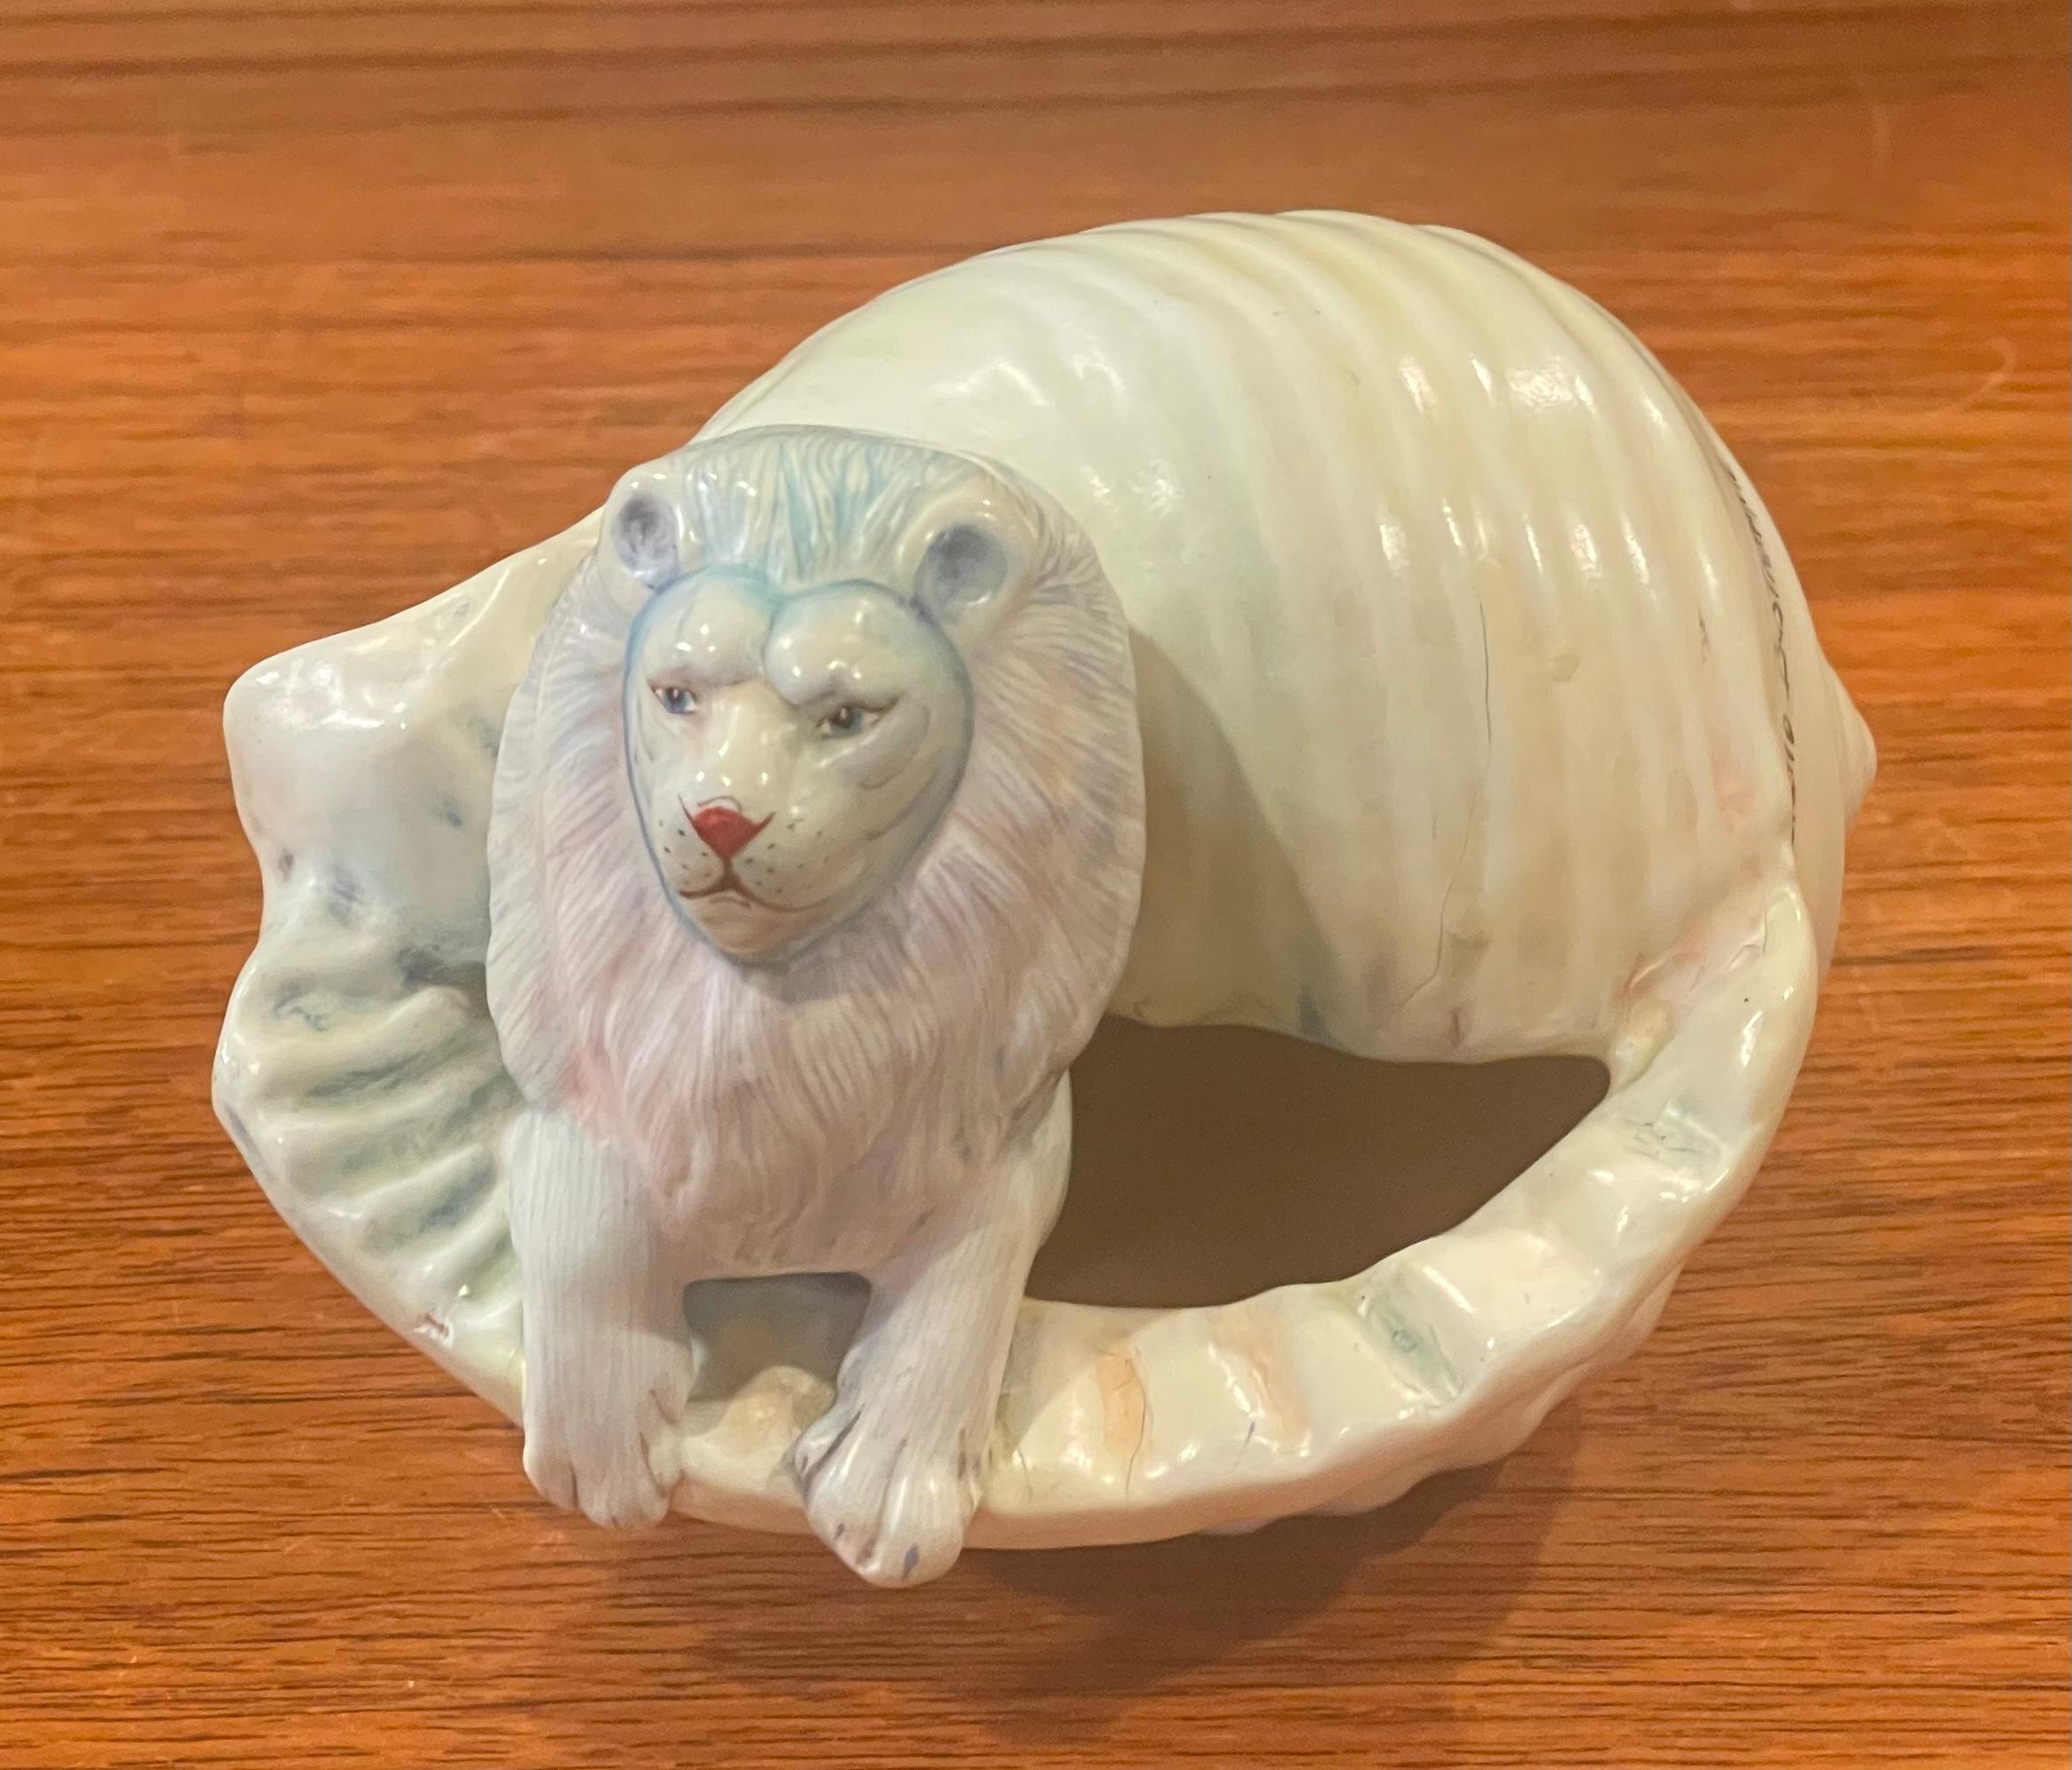 Mexican Whimsical Ceramic Lion in Conch Shell Sculpture by Sergio Bustamante